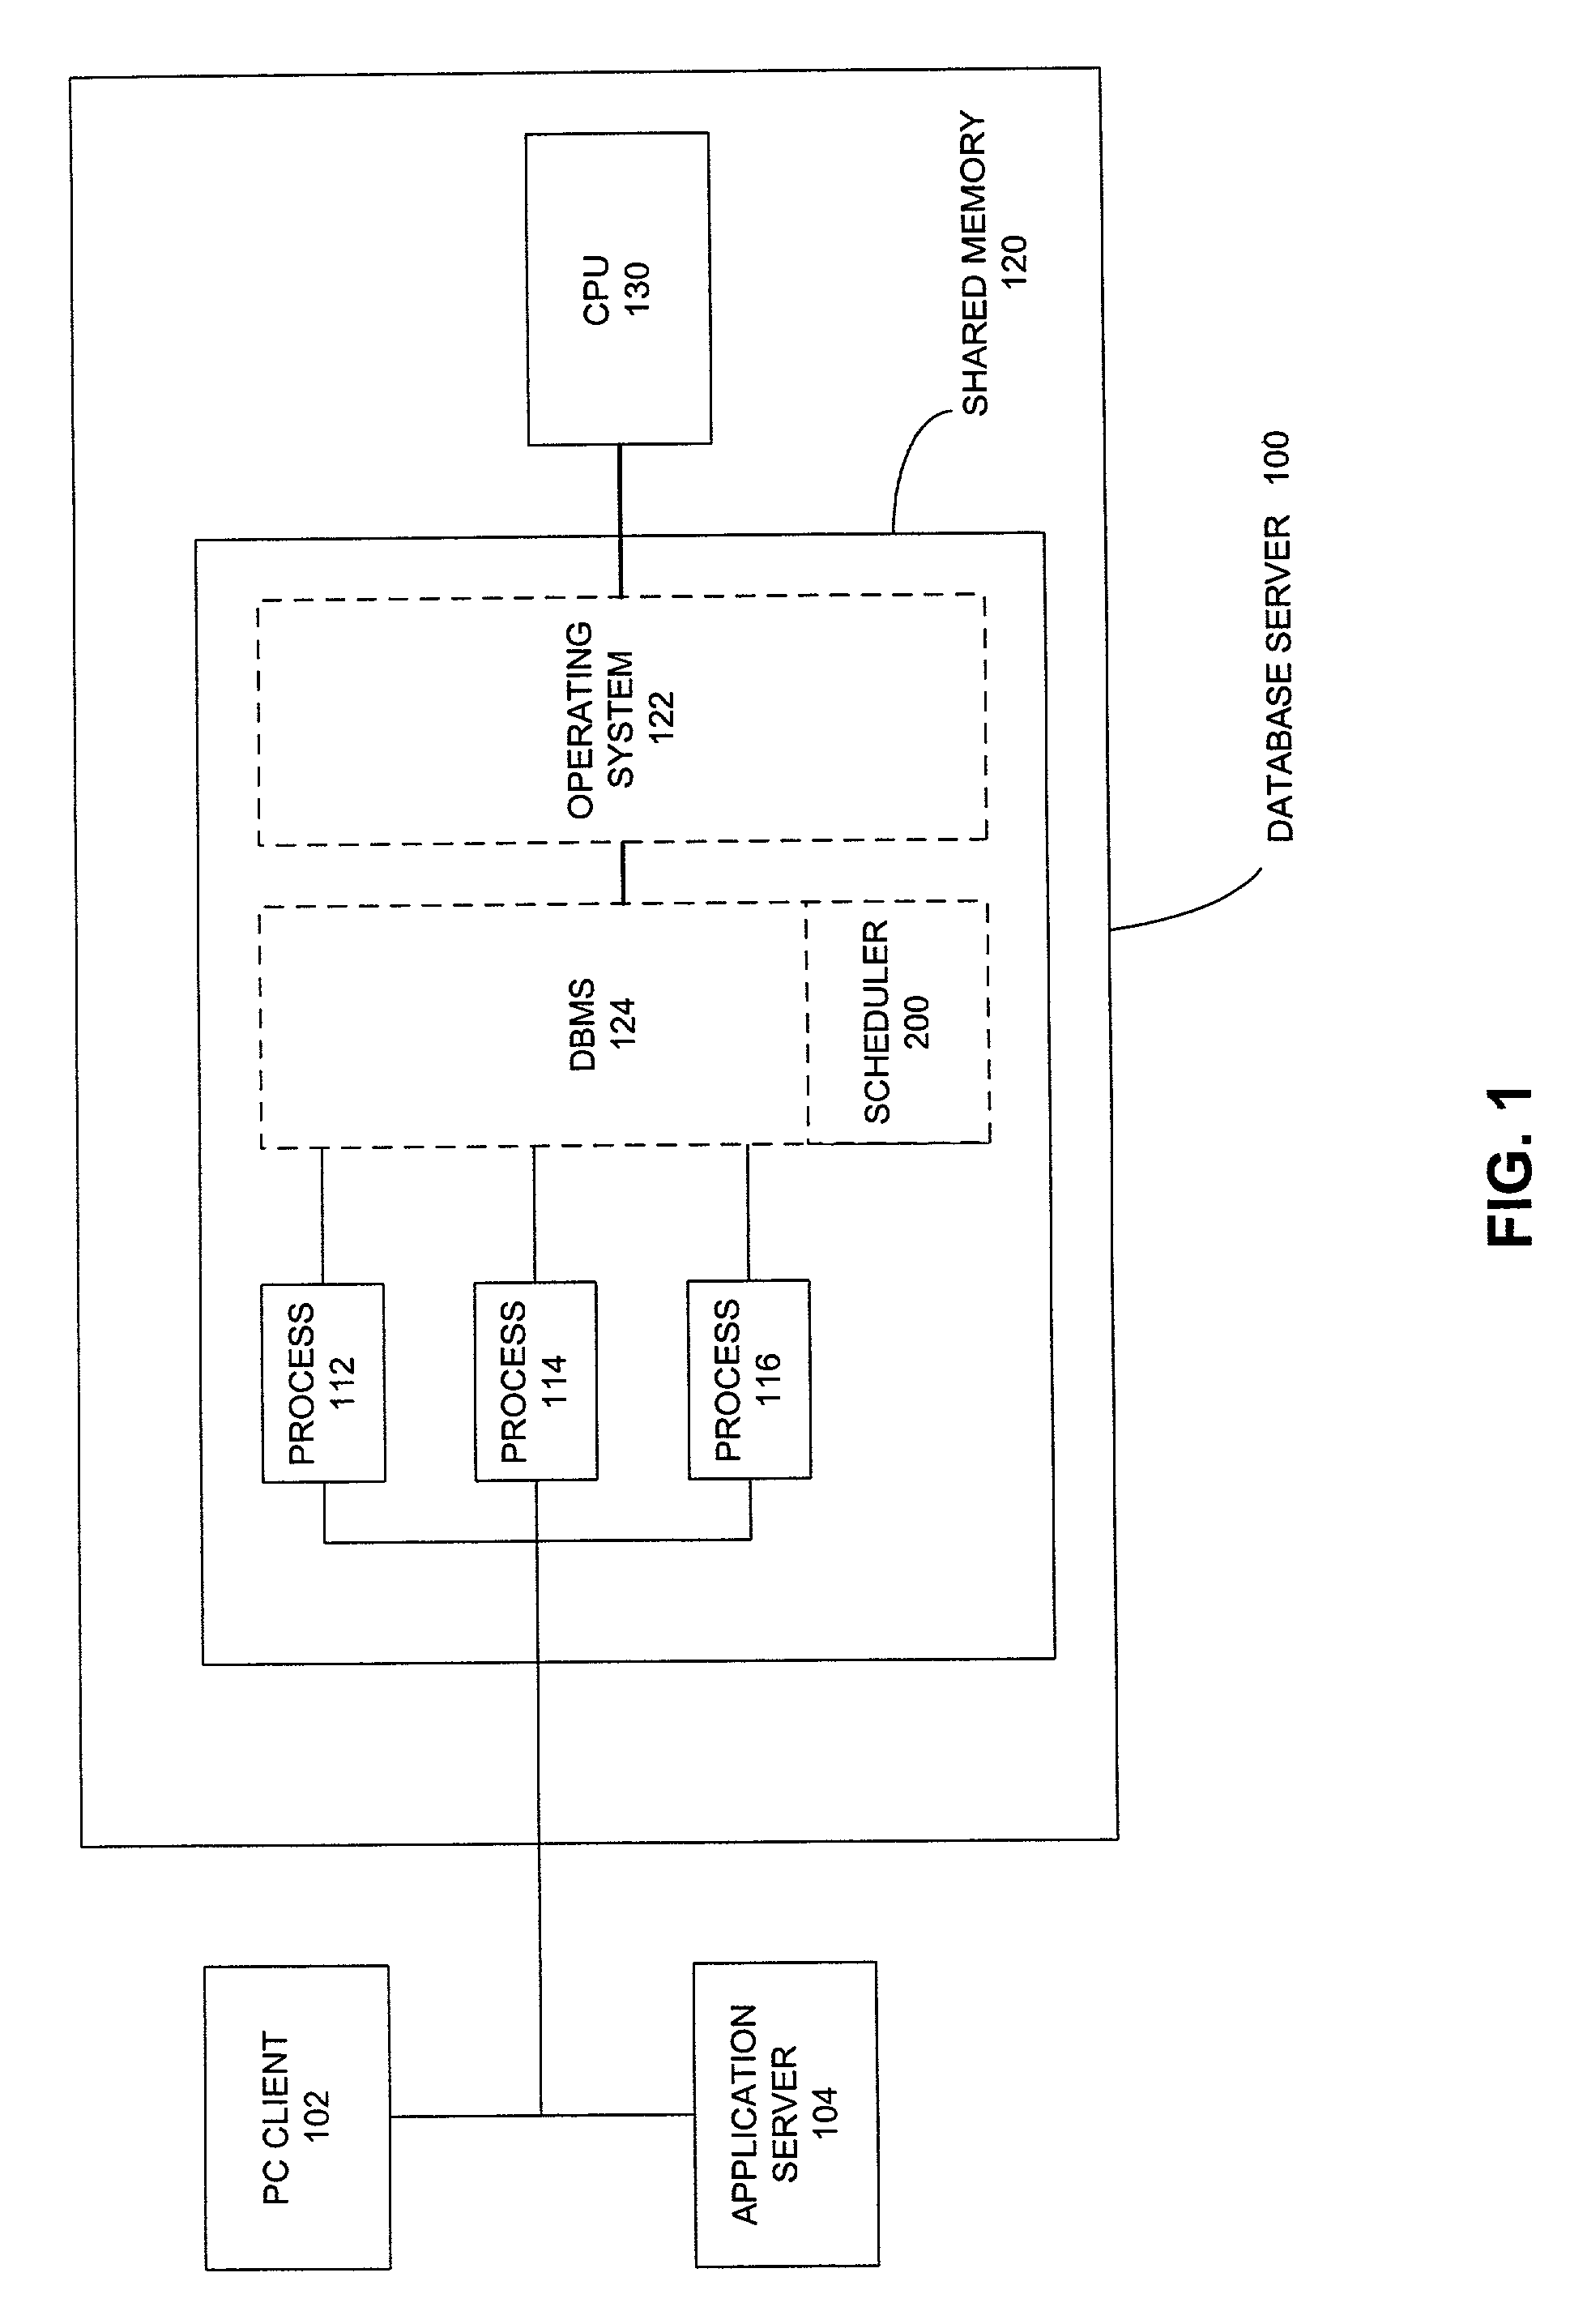 Methods for selectively quiescing a computer system